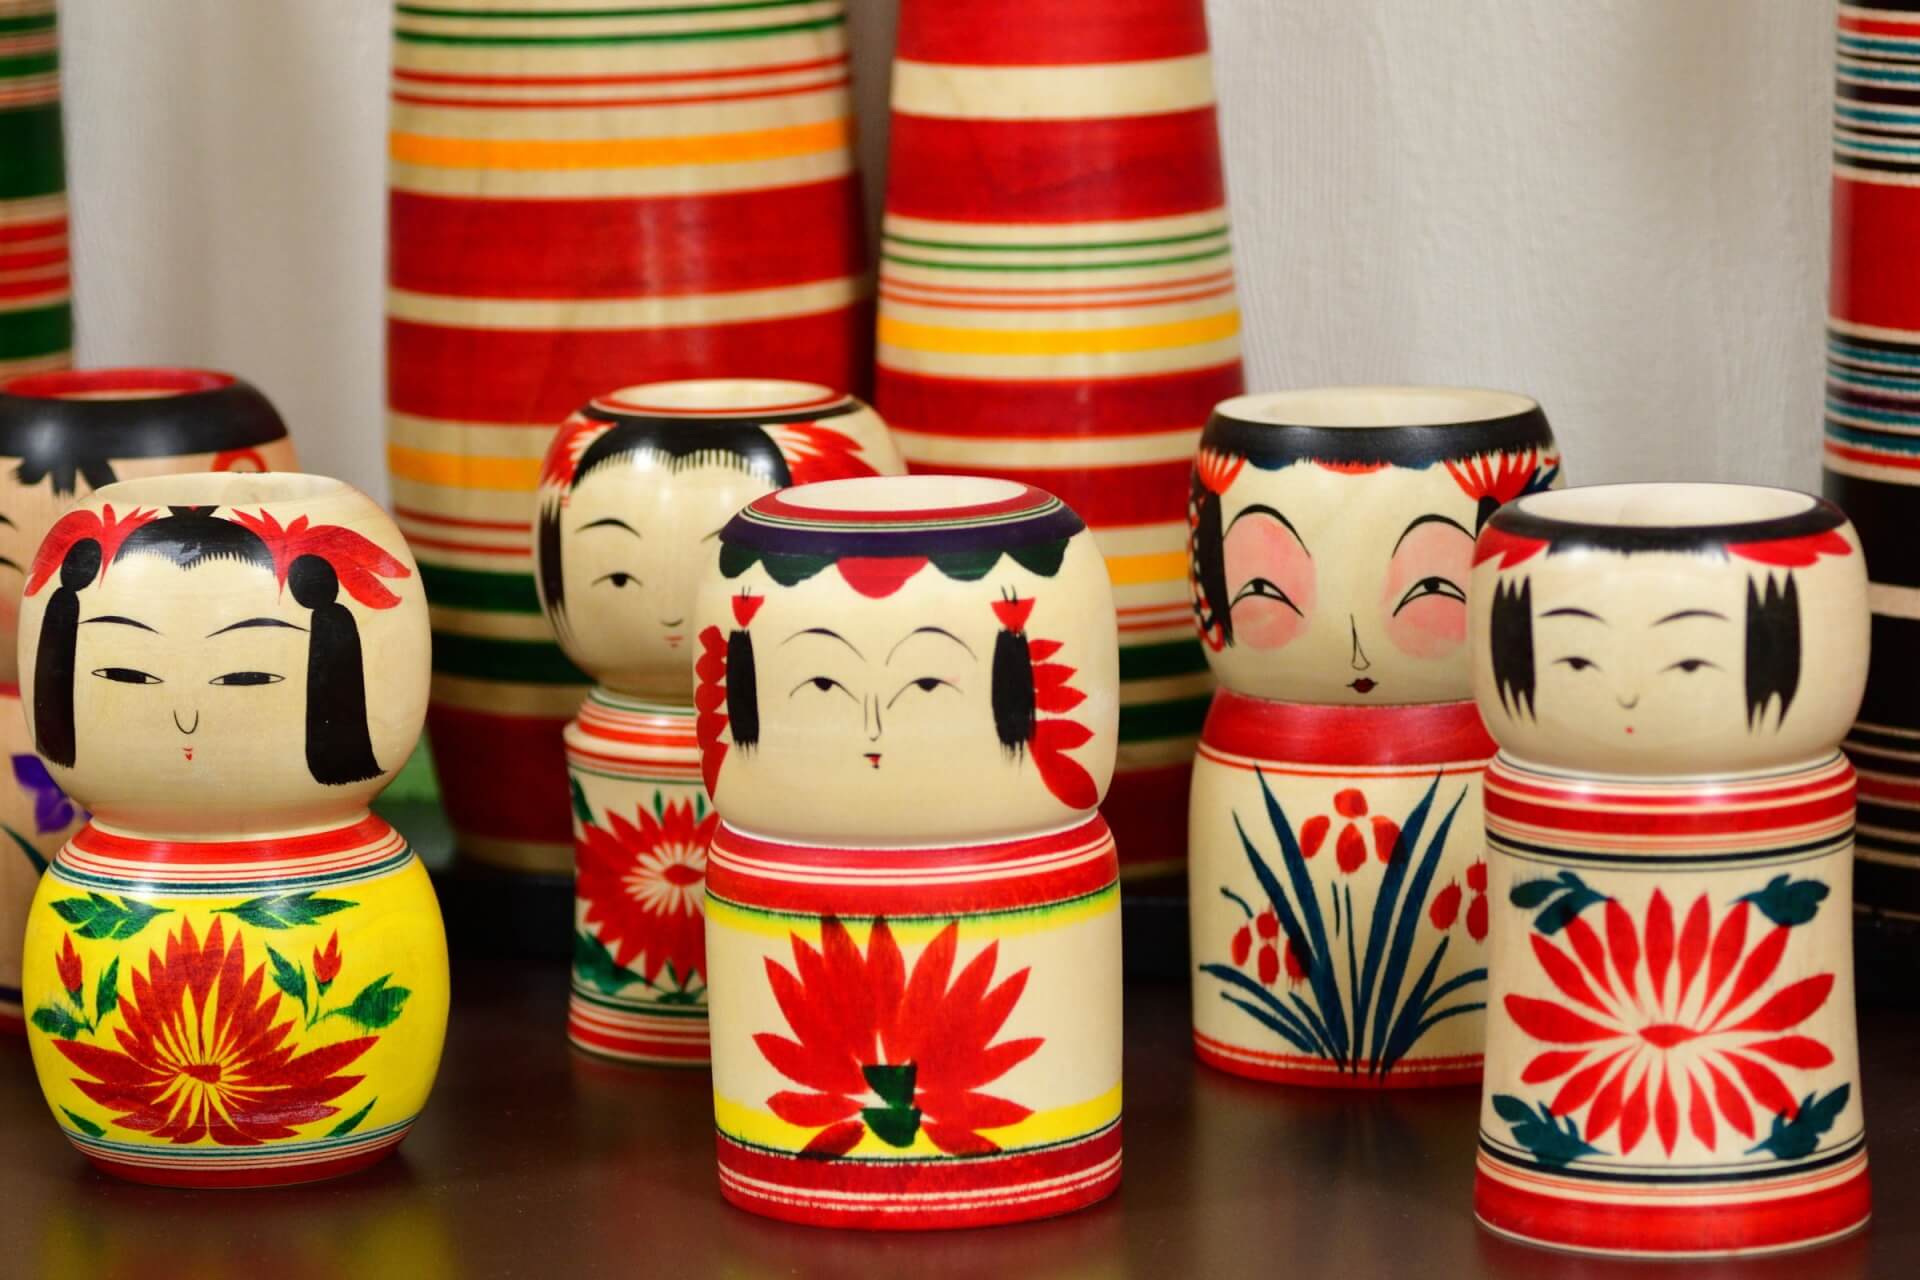 30 Japanese Arts & Crafts You Need To Know - SNOW MONKEY RESORTS